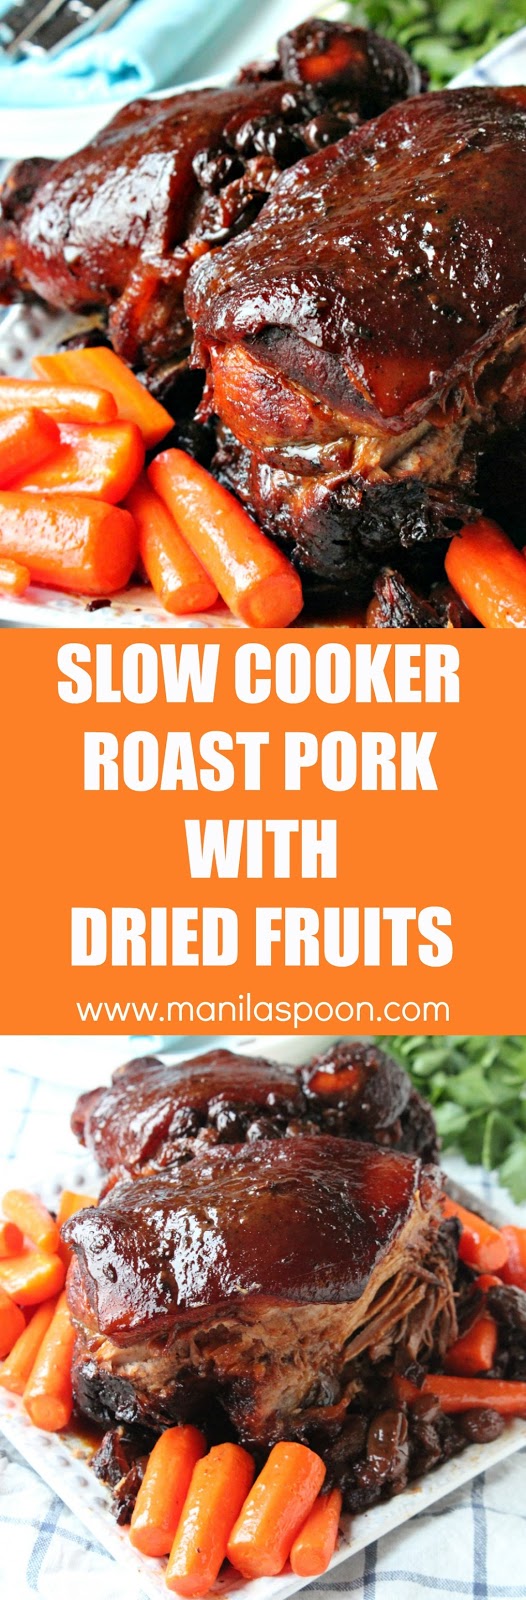 Melt-in-your-mouth, moist and delicious Slow Cooker Roast Pork with Dried Fruits that you'll make over and over again. Use a different variety of fruits - dried giant raisins, apricot, plums, cherries, etc. It's your choice. | manilaspoon.com